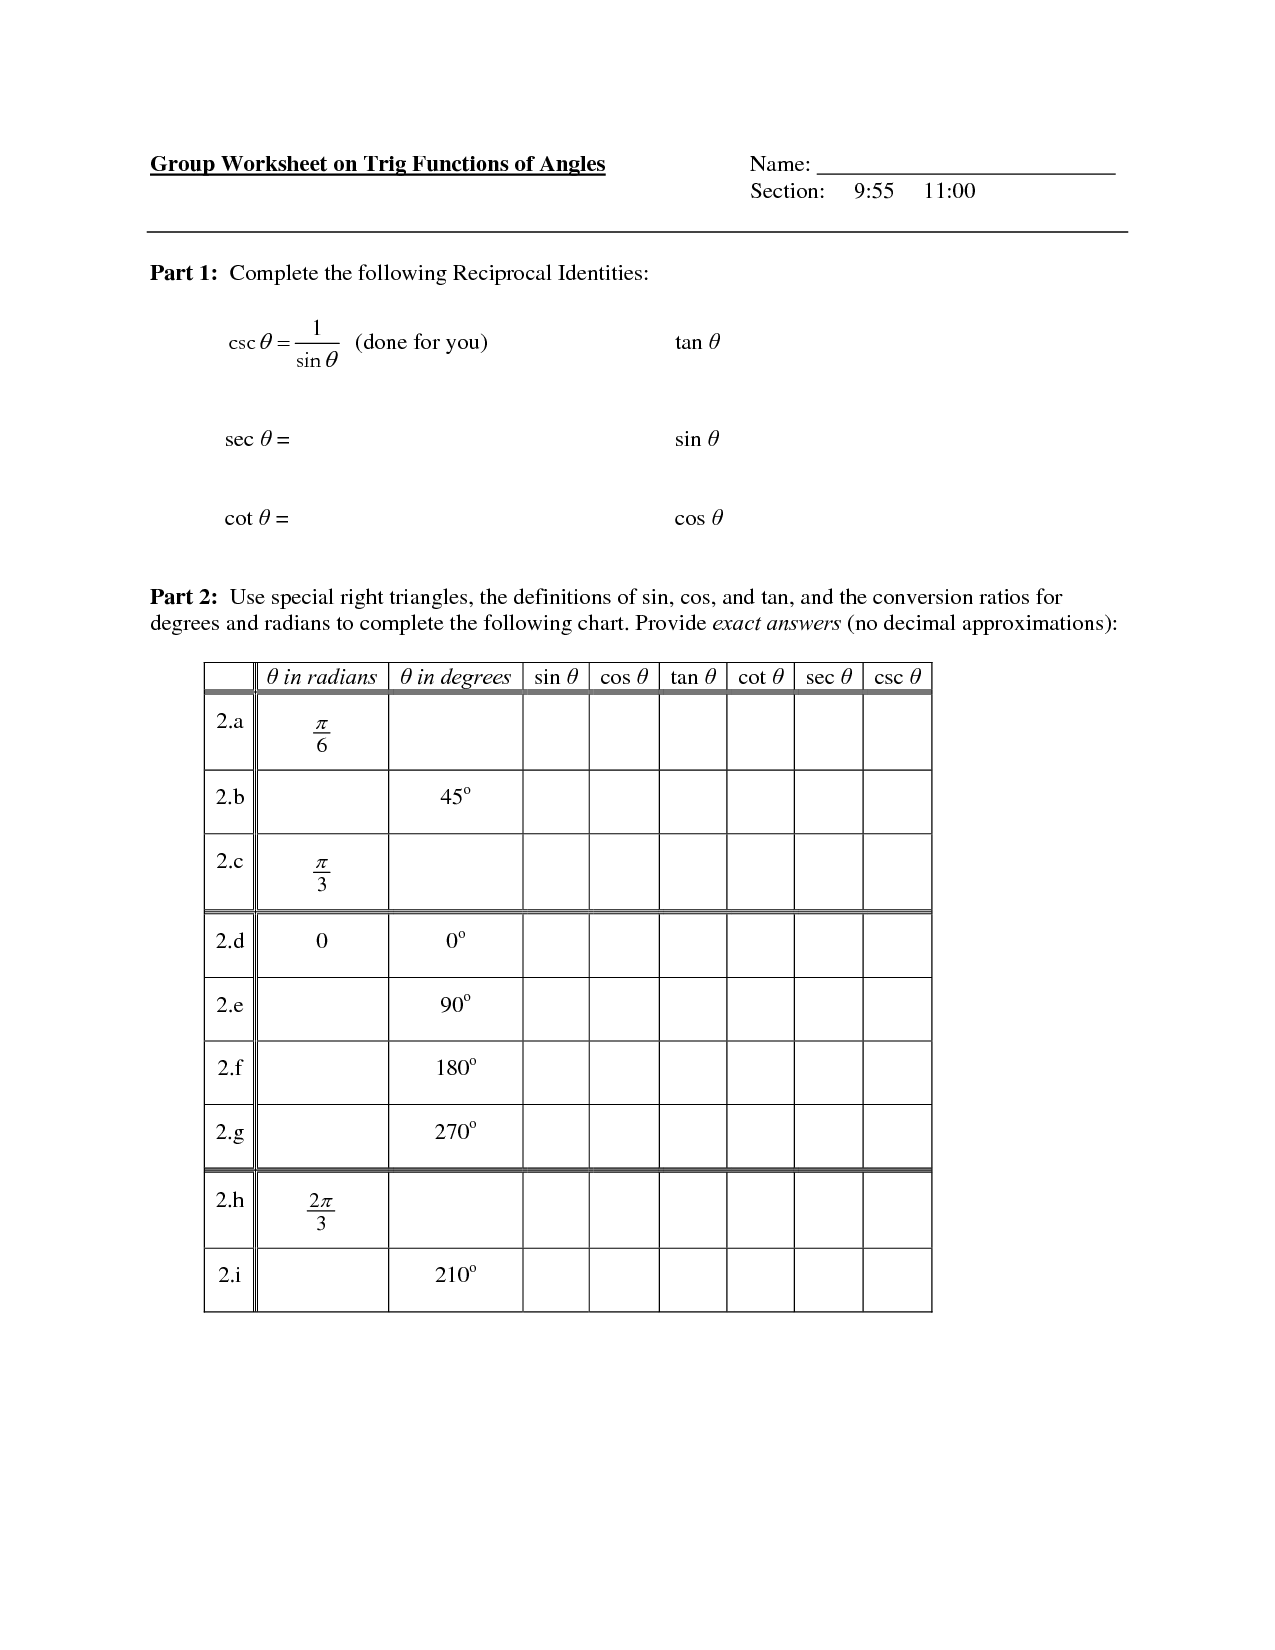 Special Angles of Trig Functions Worksheet Image